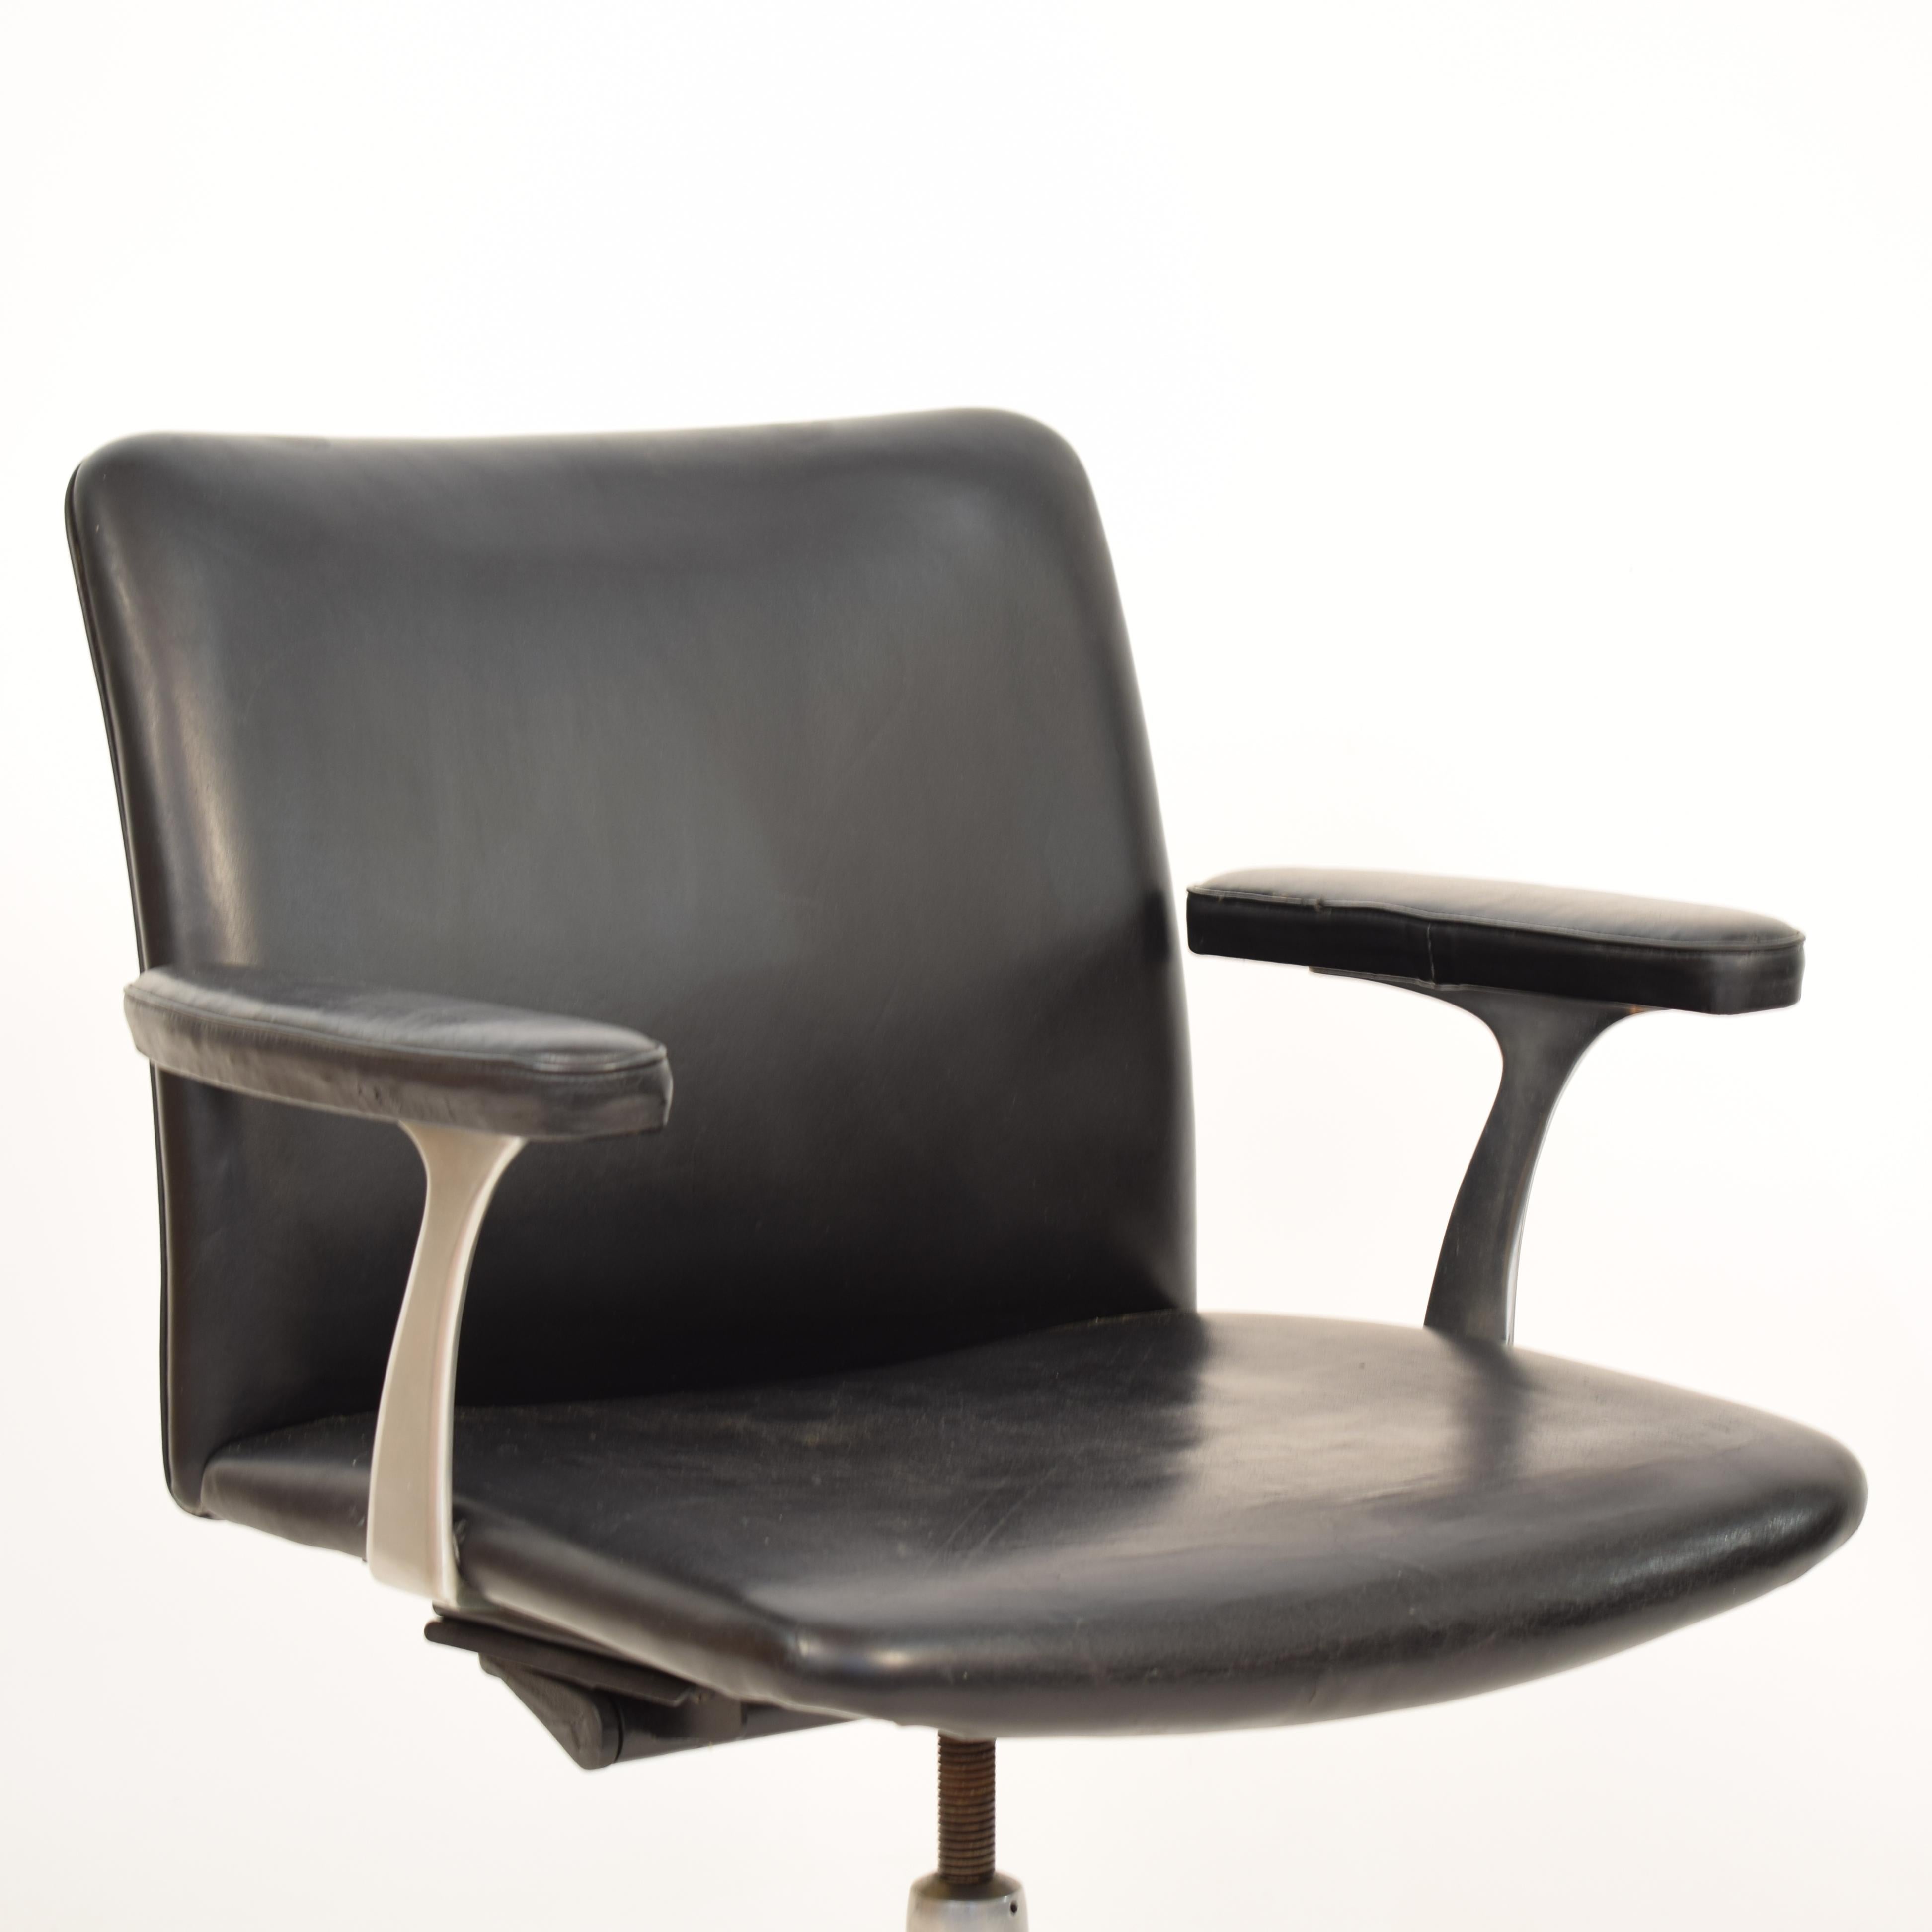 Midcentury Scandinavian Armchair in Black Leather and Aluminum, circa 1970 For Sale 8